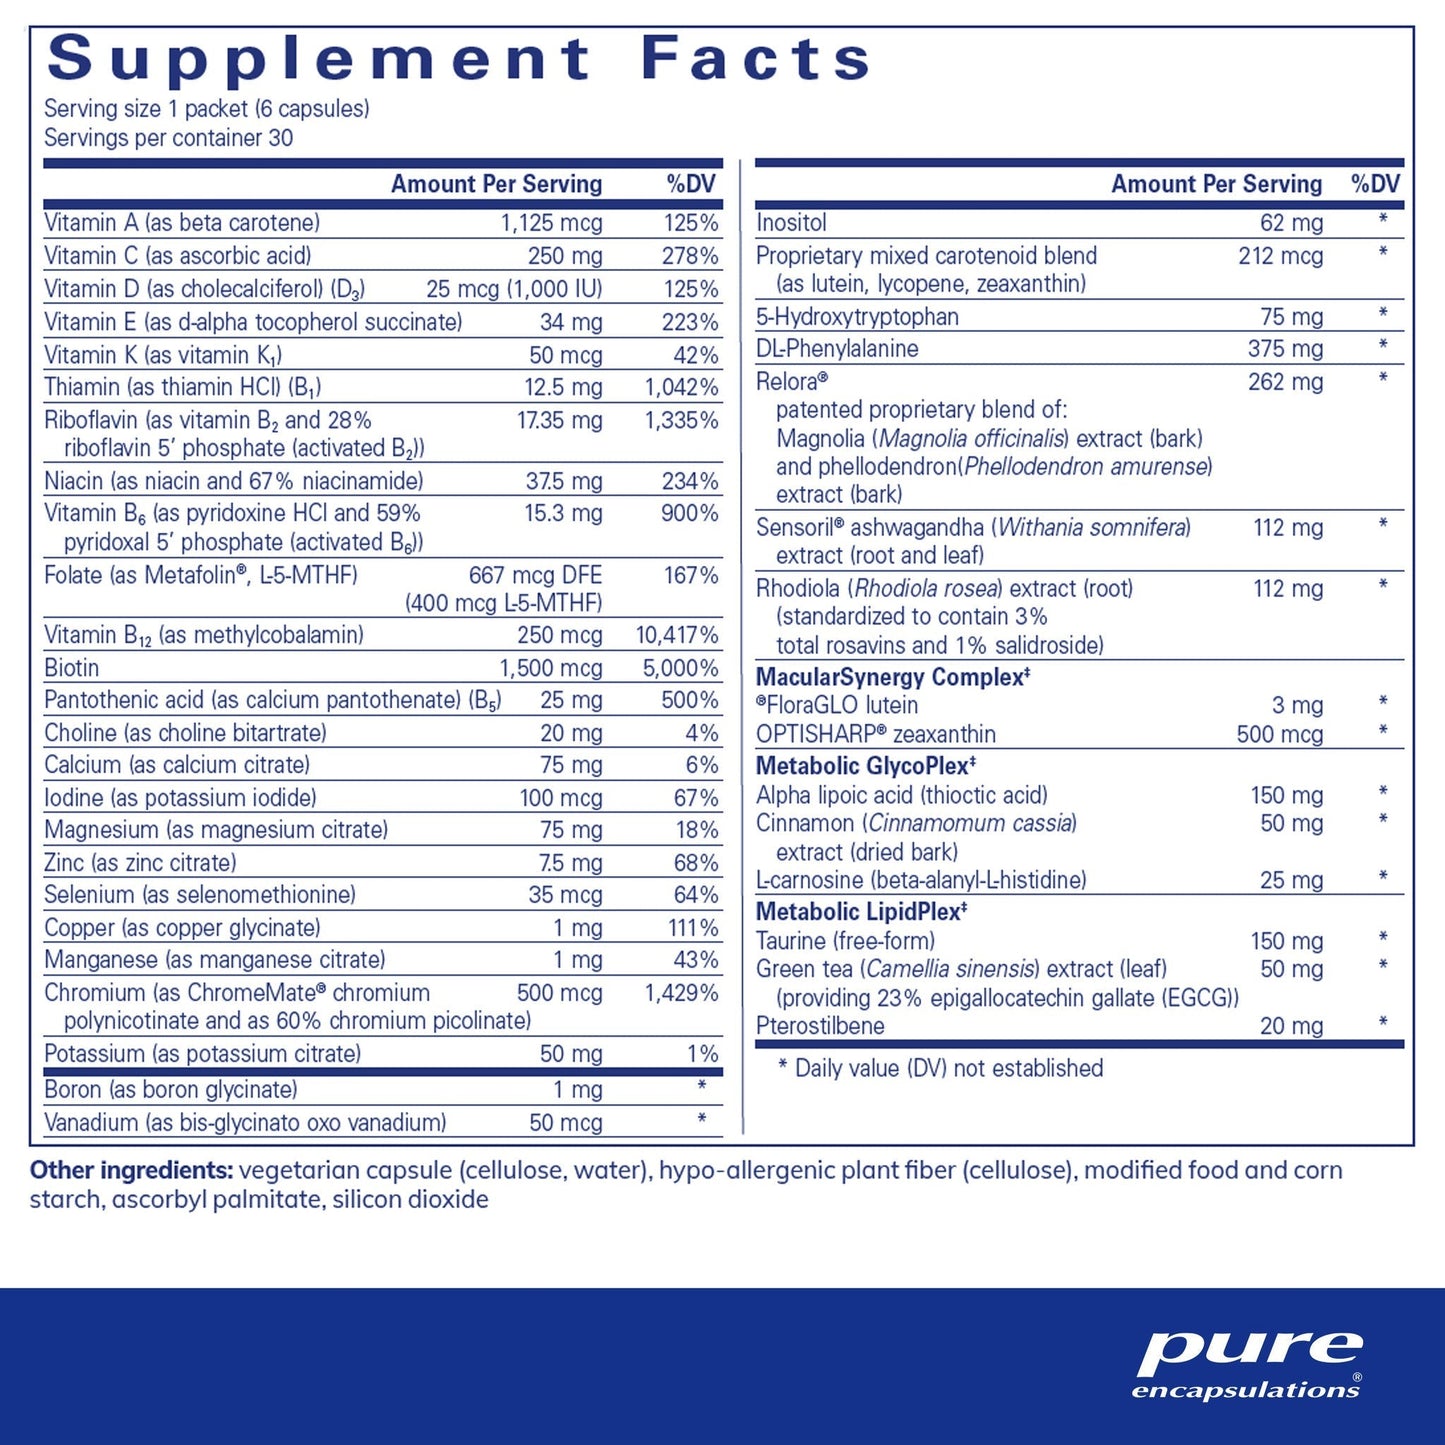 Daily Pure Pack - Weight Support